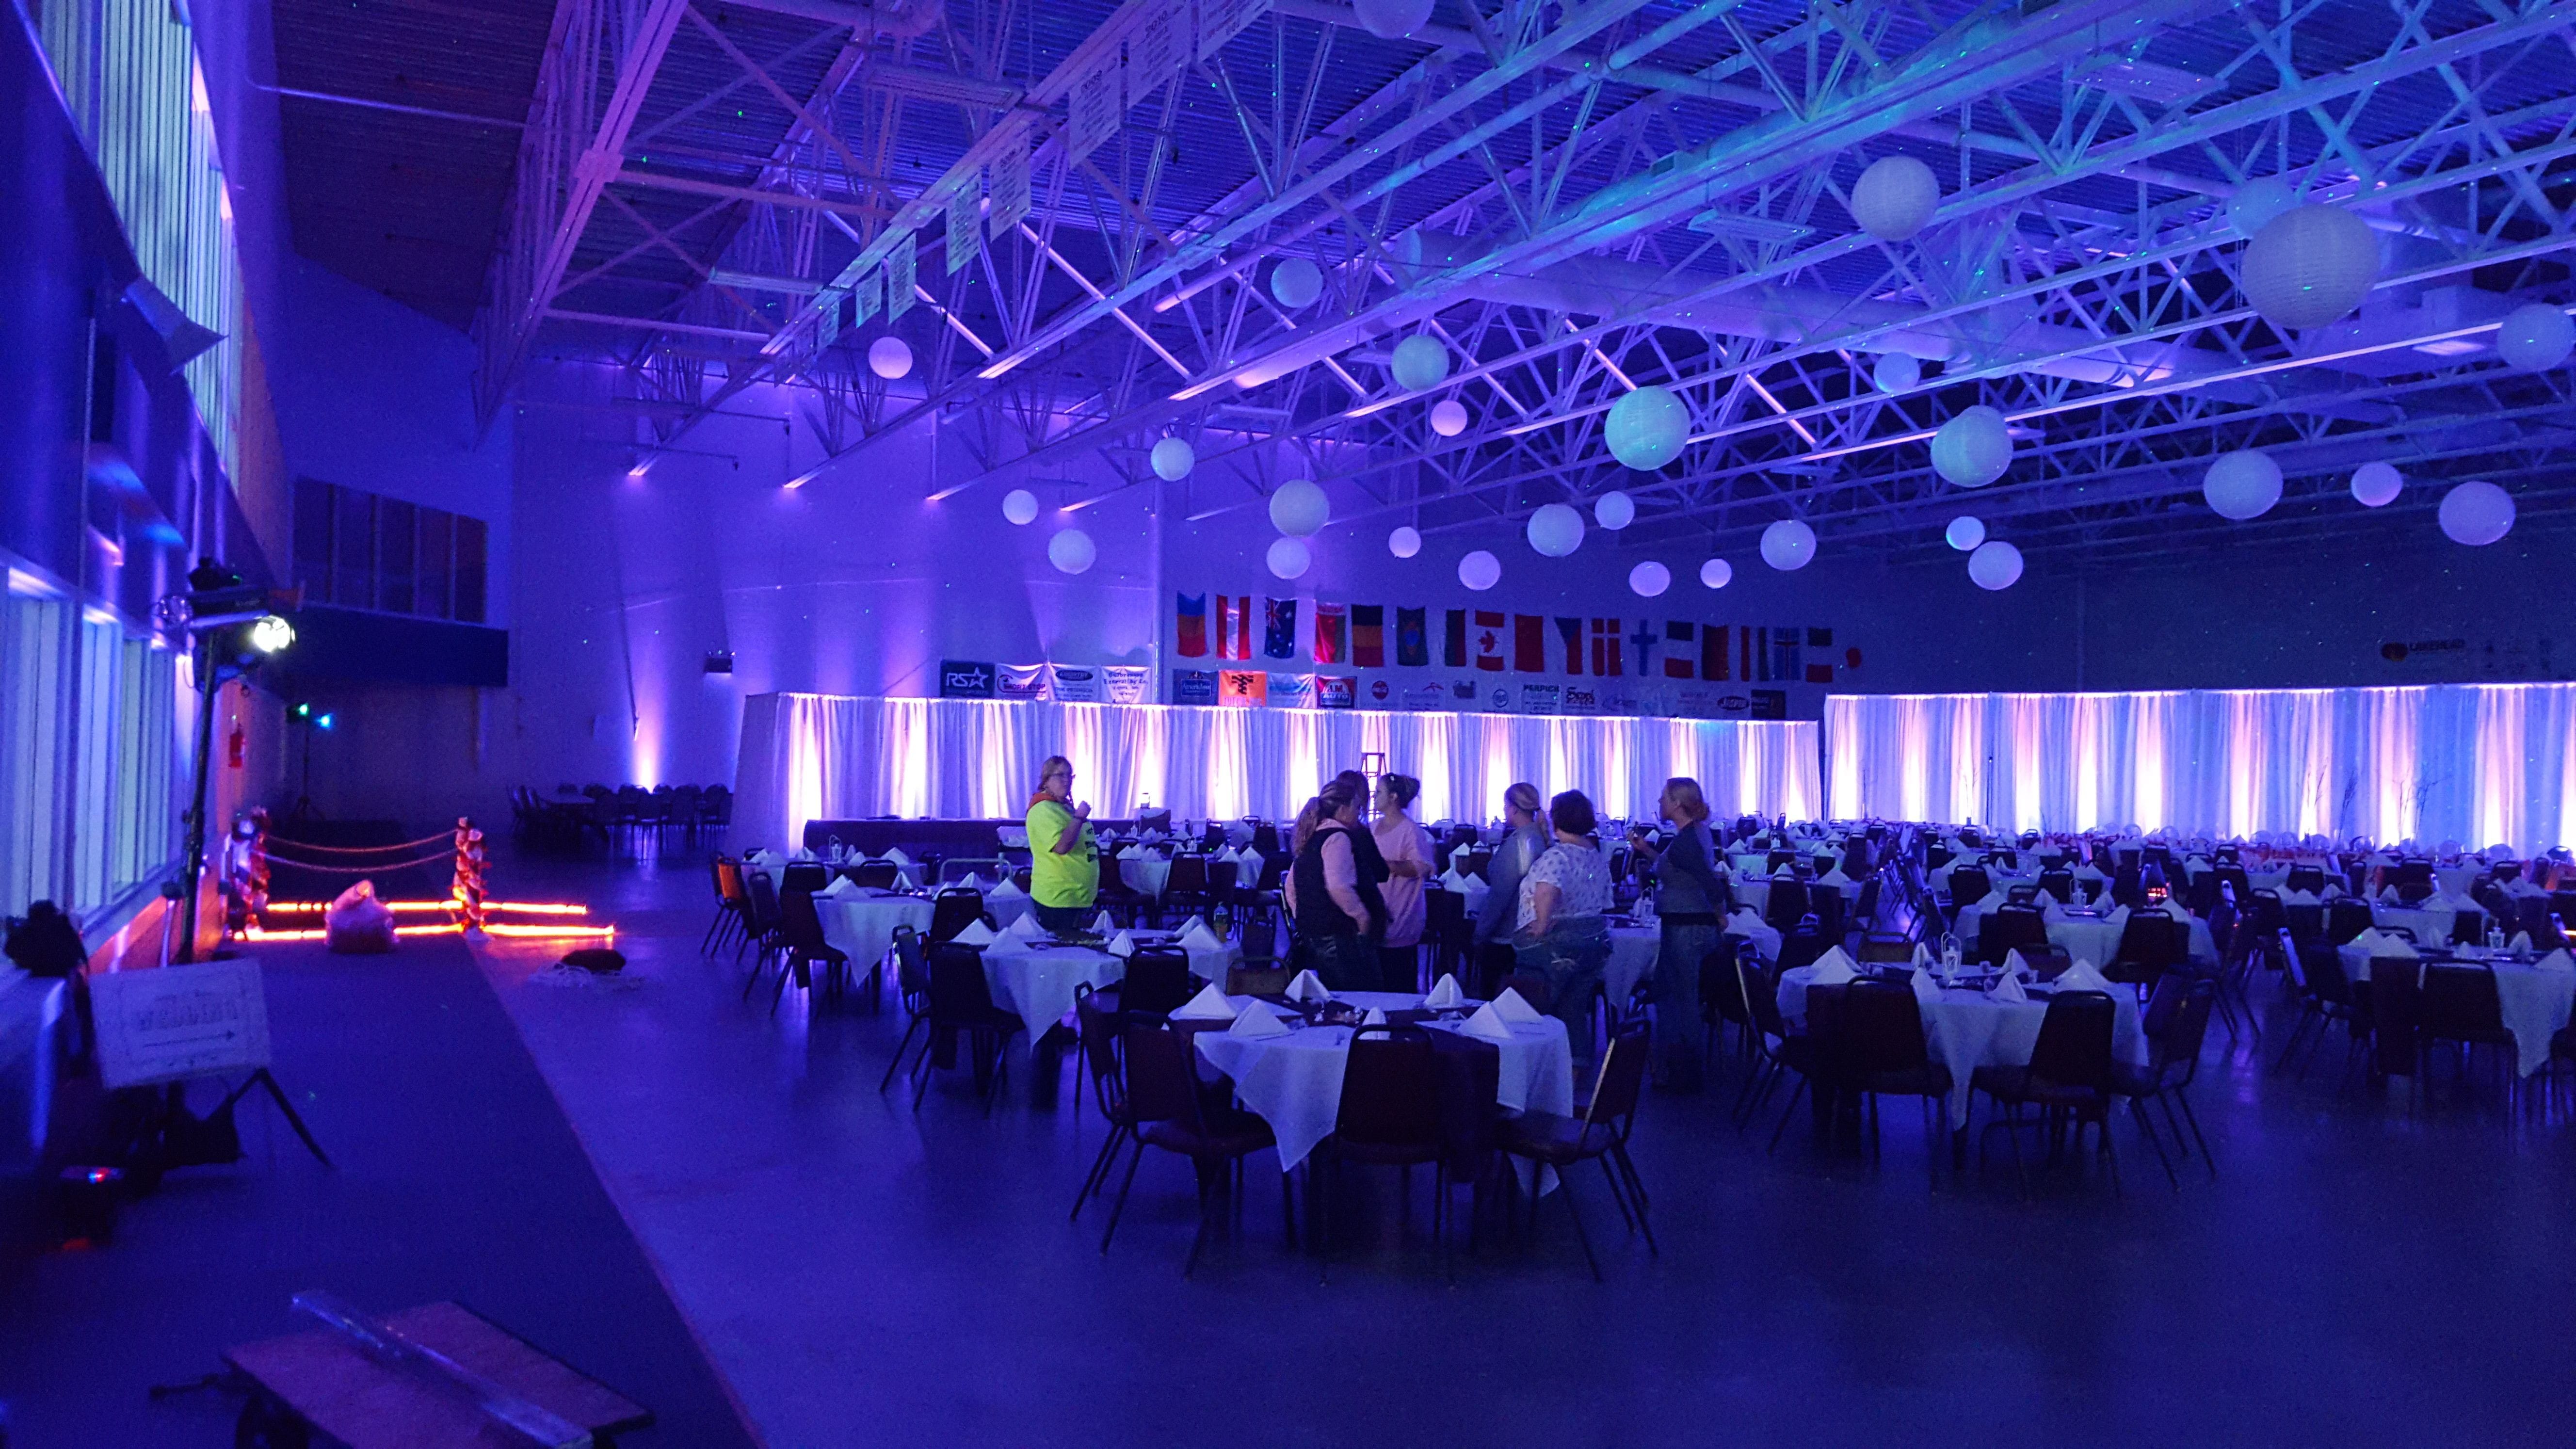 Lighting by Duluth Event Lighting at the Eveleth Curling Club.